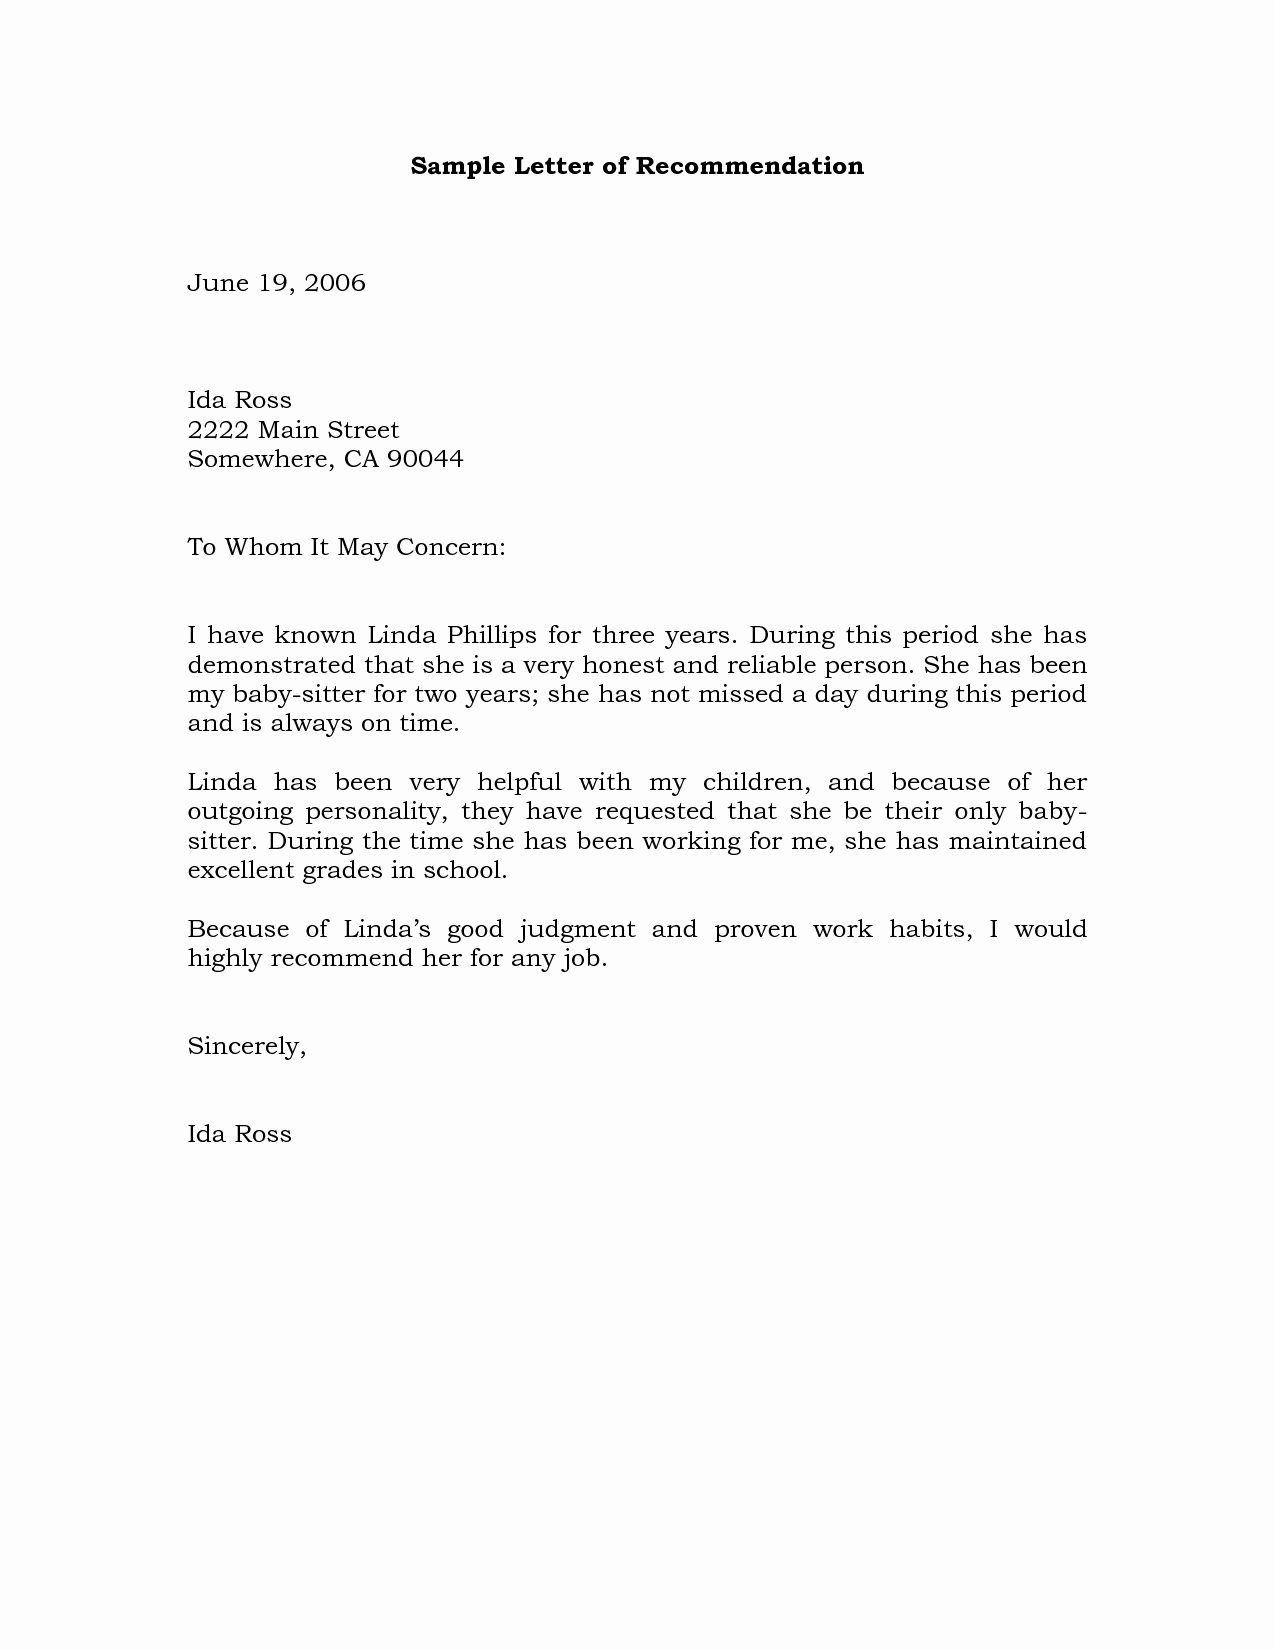 Personal Reference Letter Samples New Sample Re Mendation Letter Example